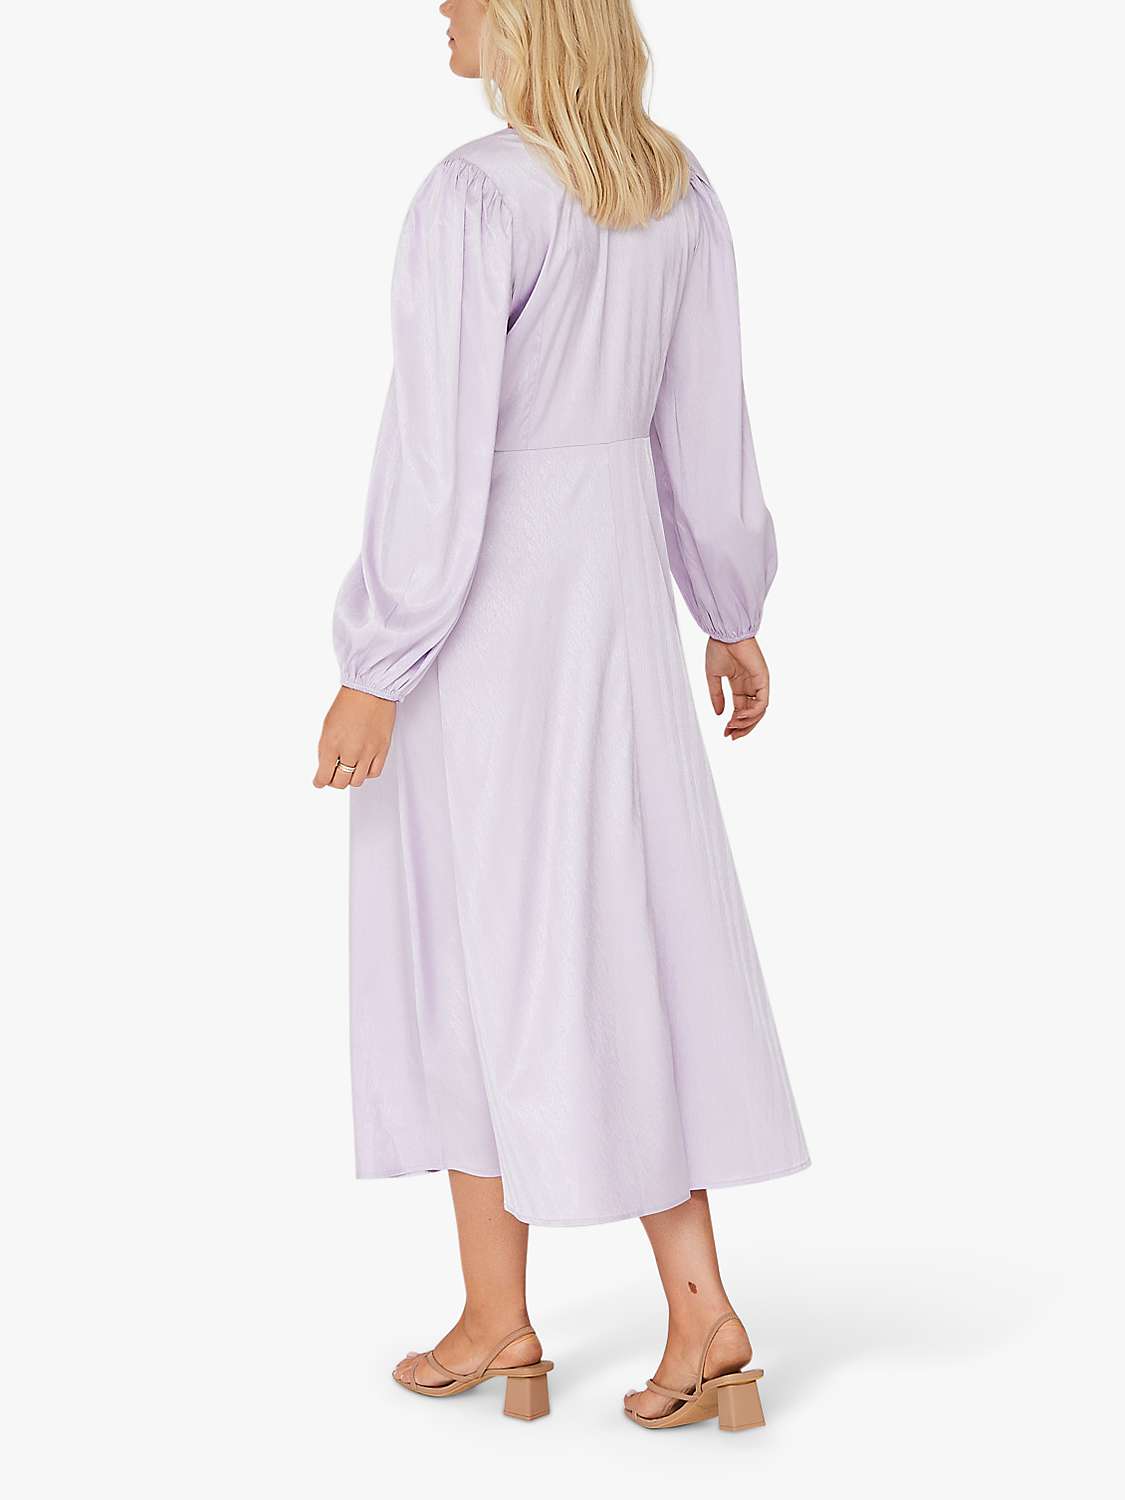 Buy A-VIEW Enitta Midi Dress, 301 Lilac Online at johnlewis.com